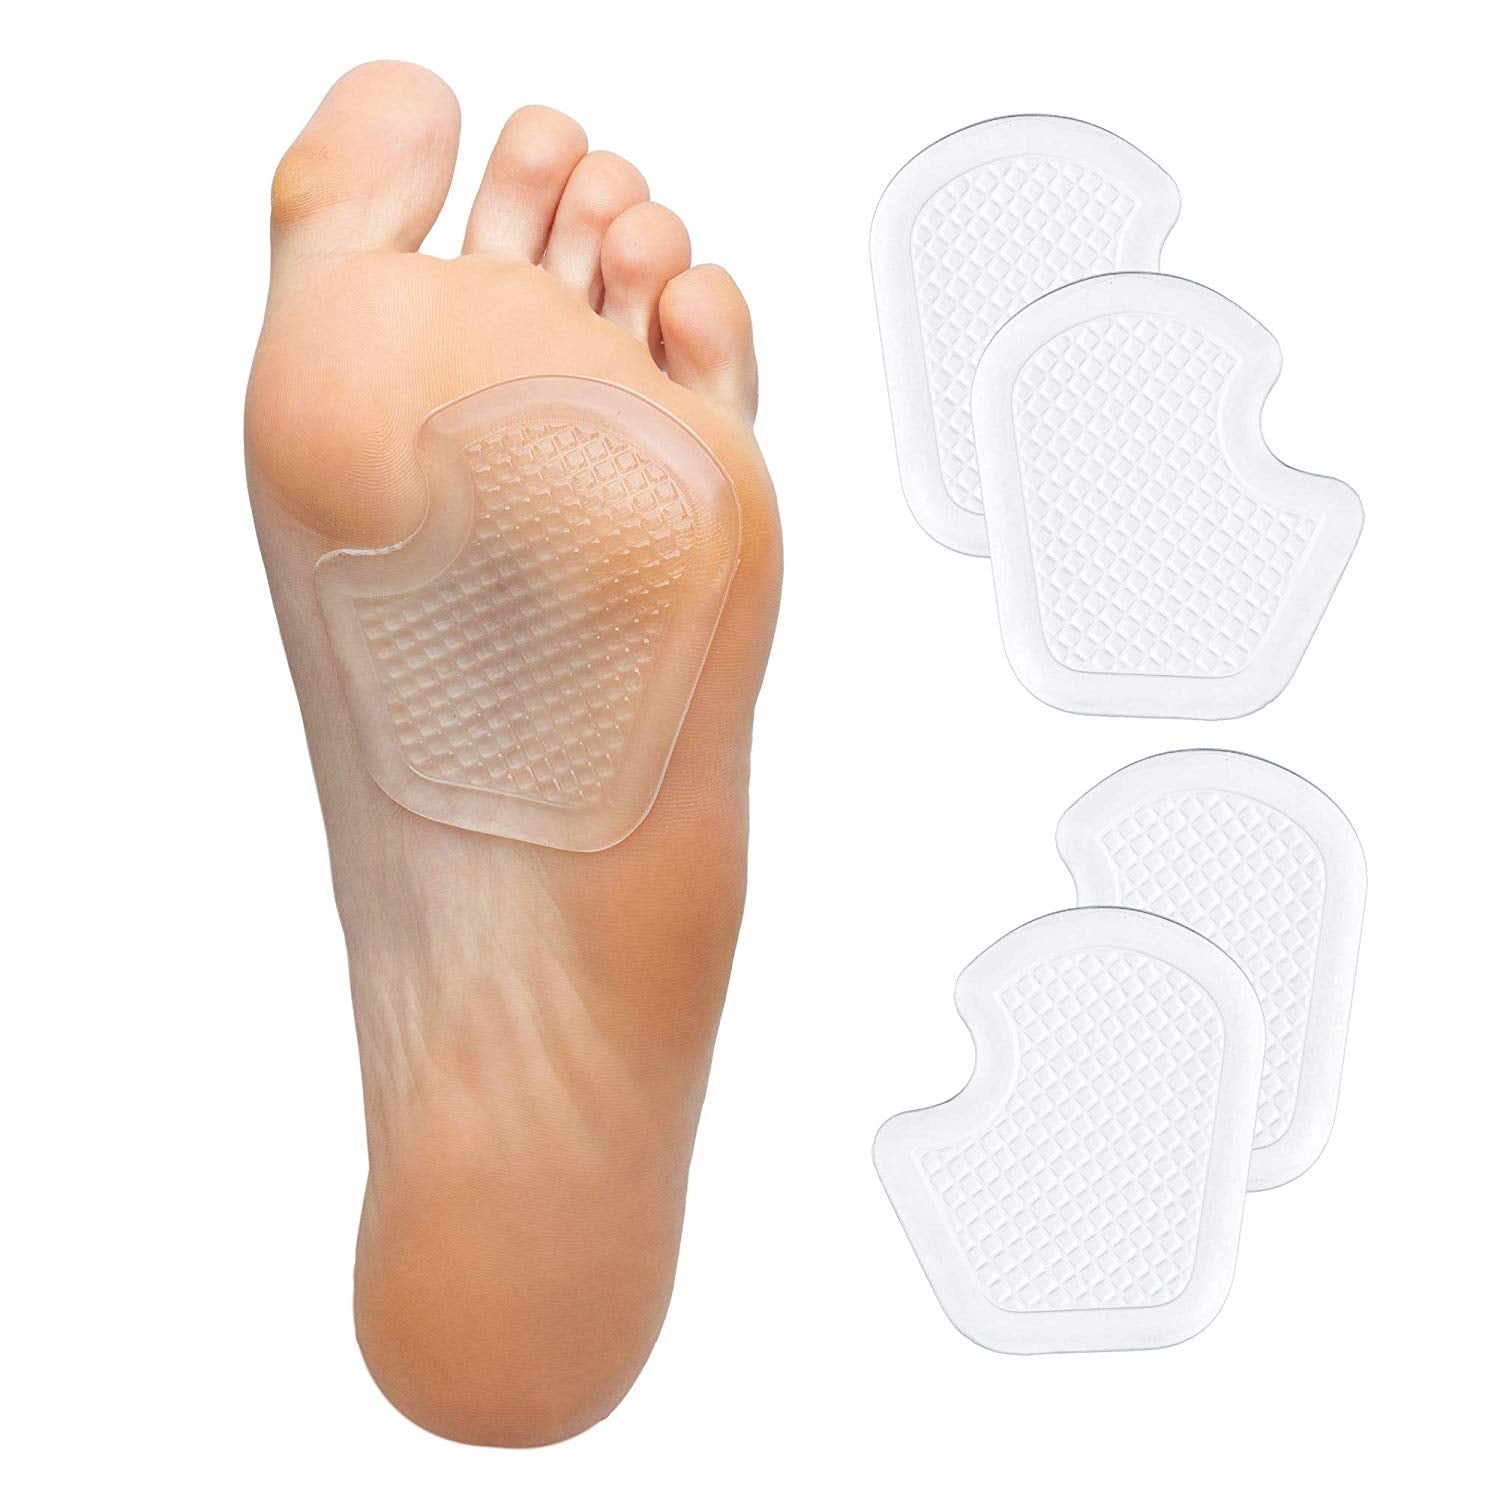 Callus Cushion Pads - Pack of 24 or 48 - 24